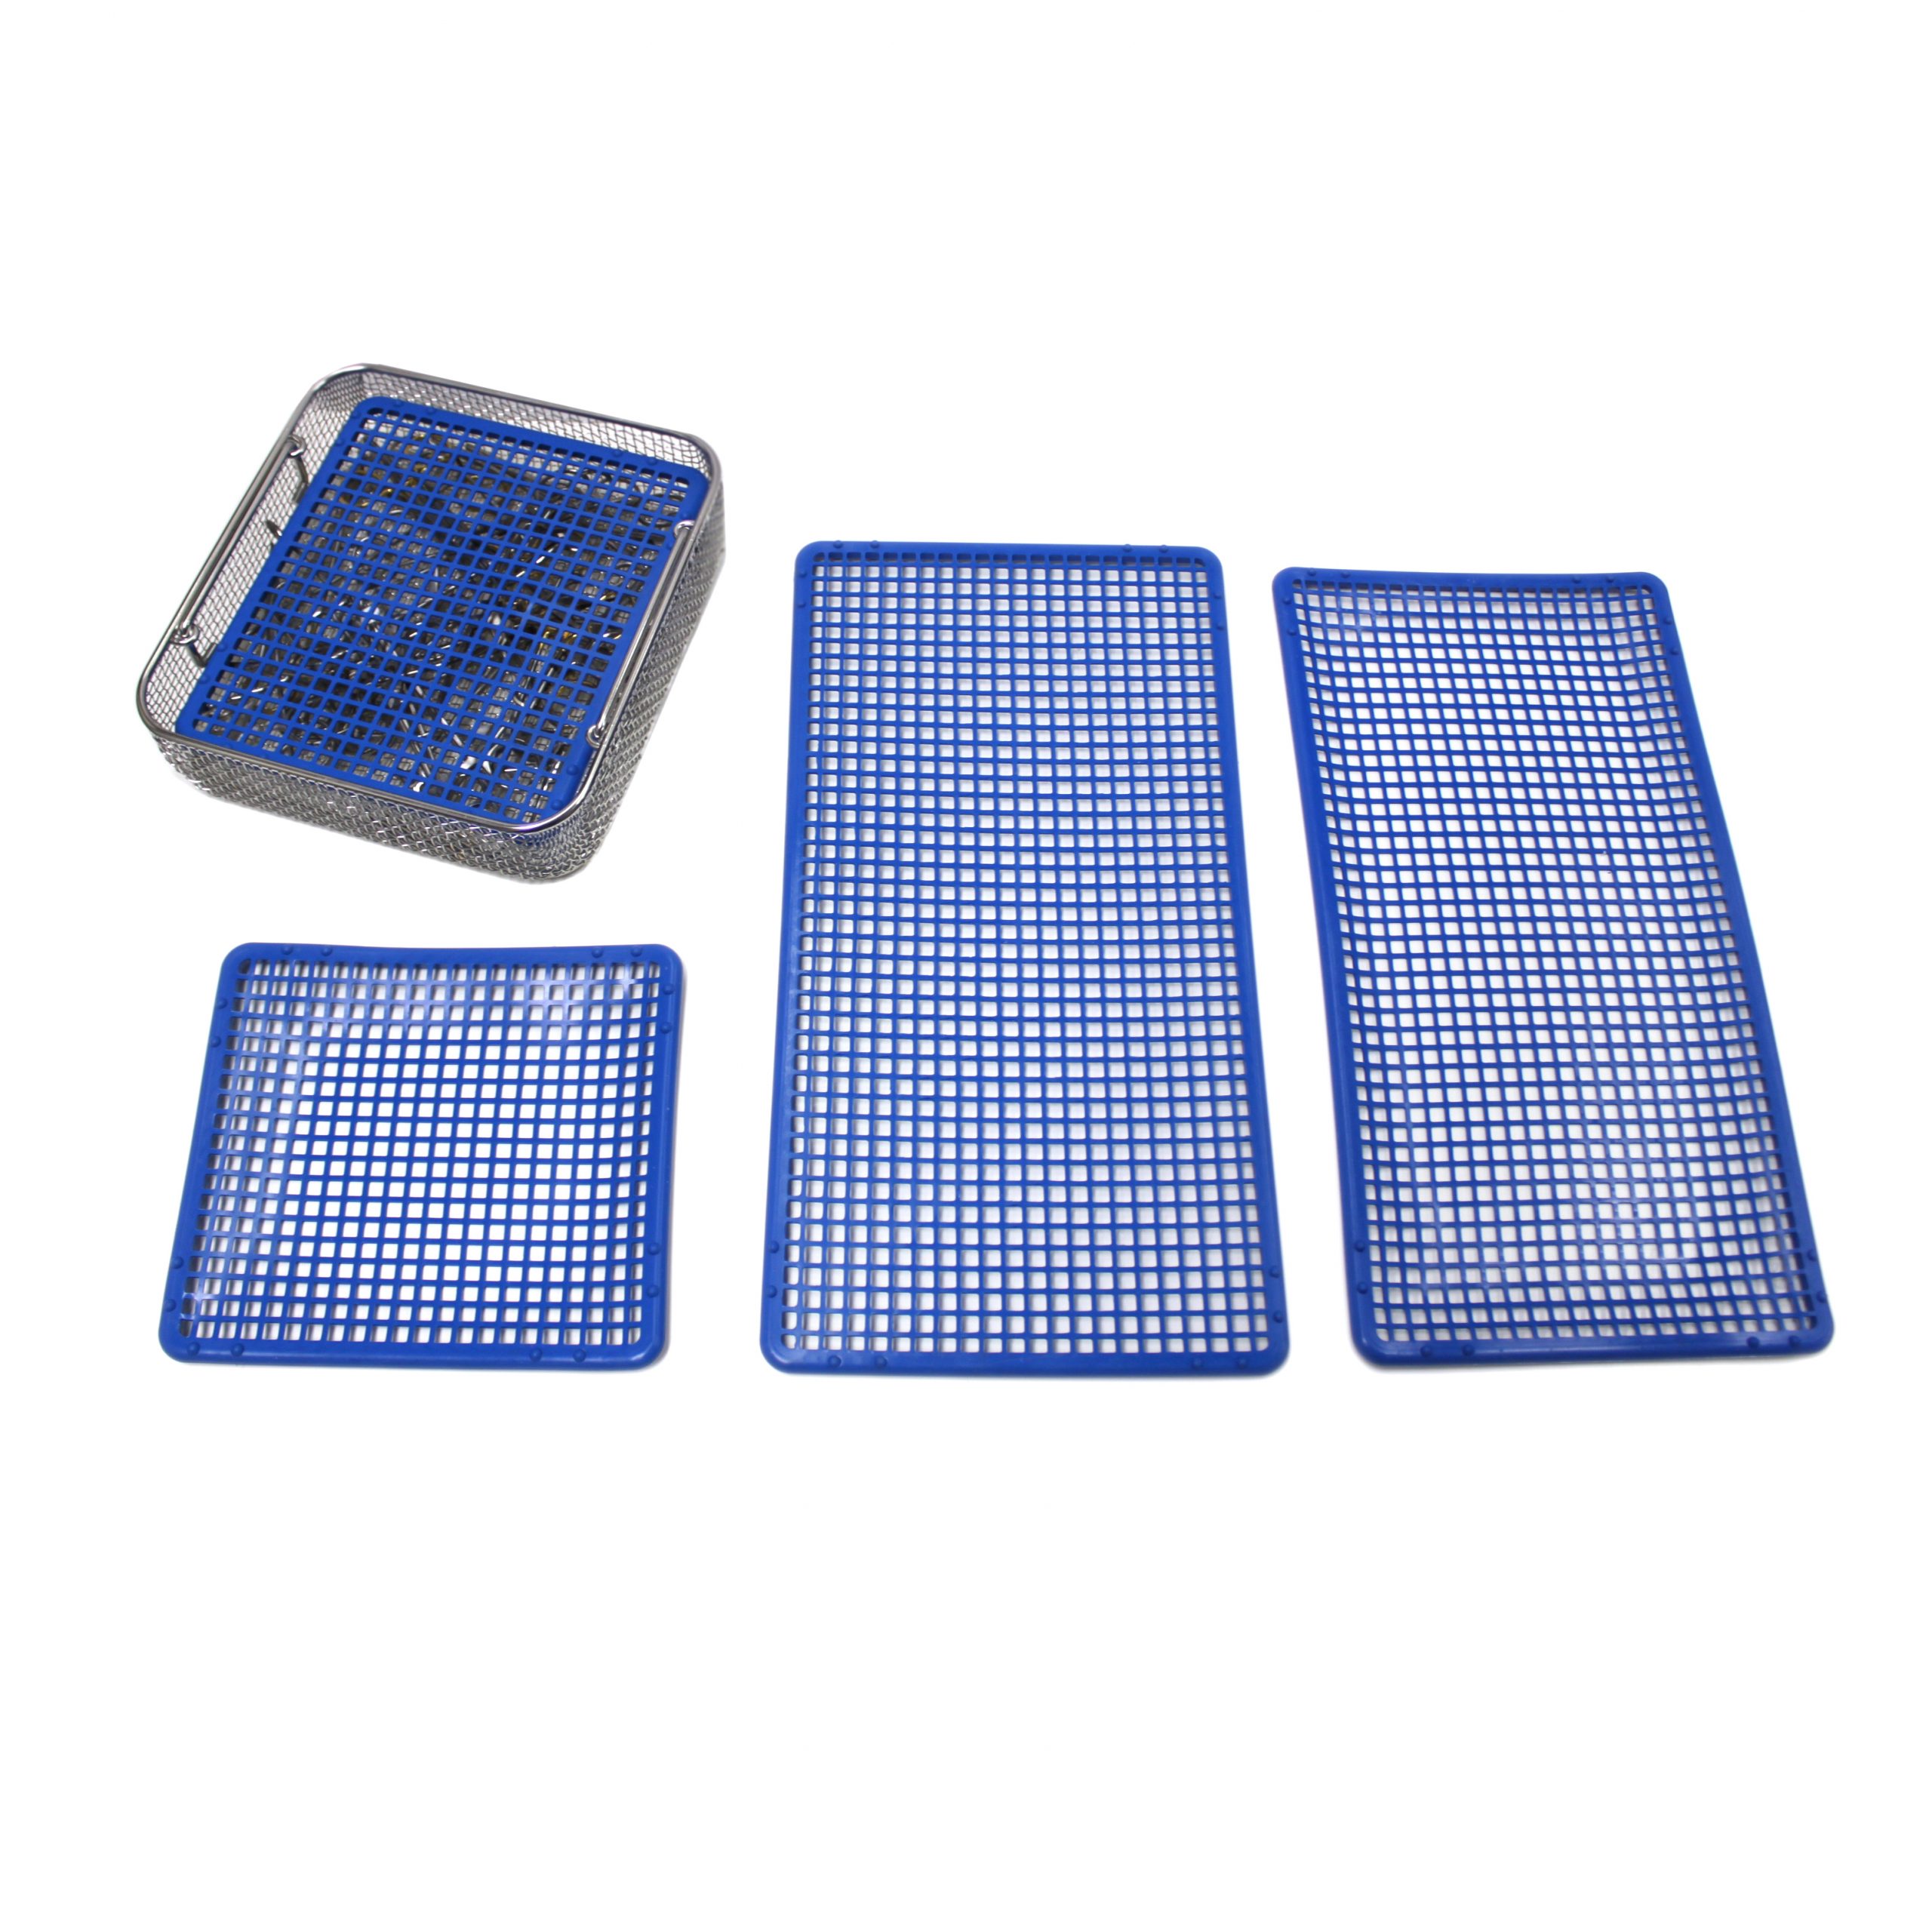 Instrument Care - Silicone Mesh Covers - Healthmark Industries